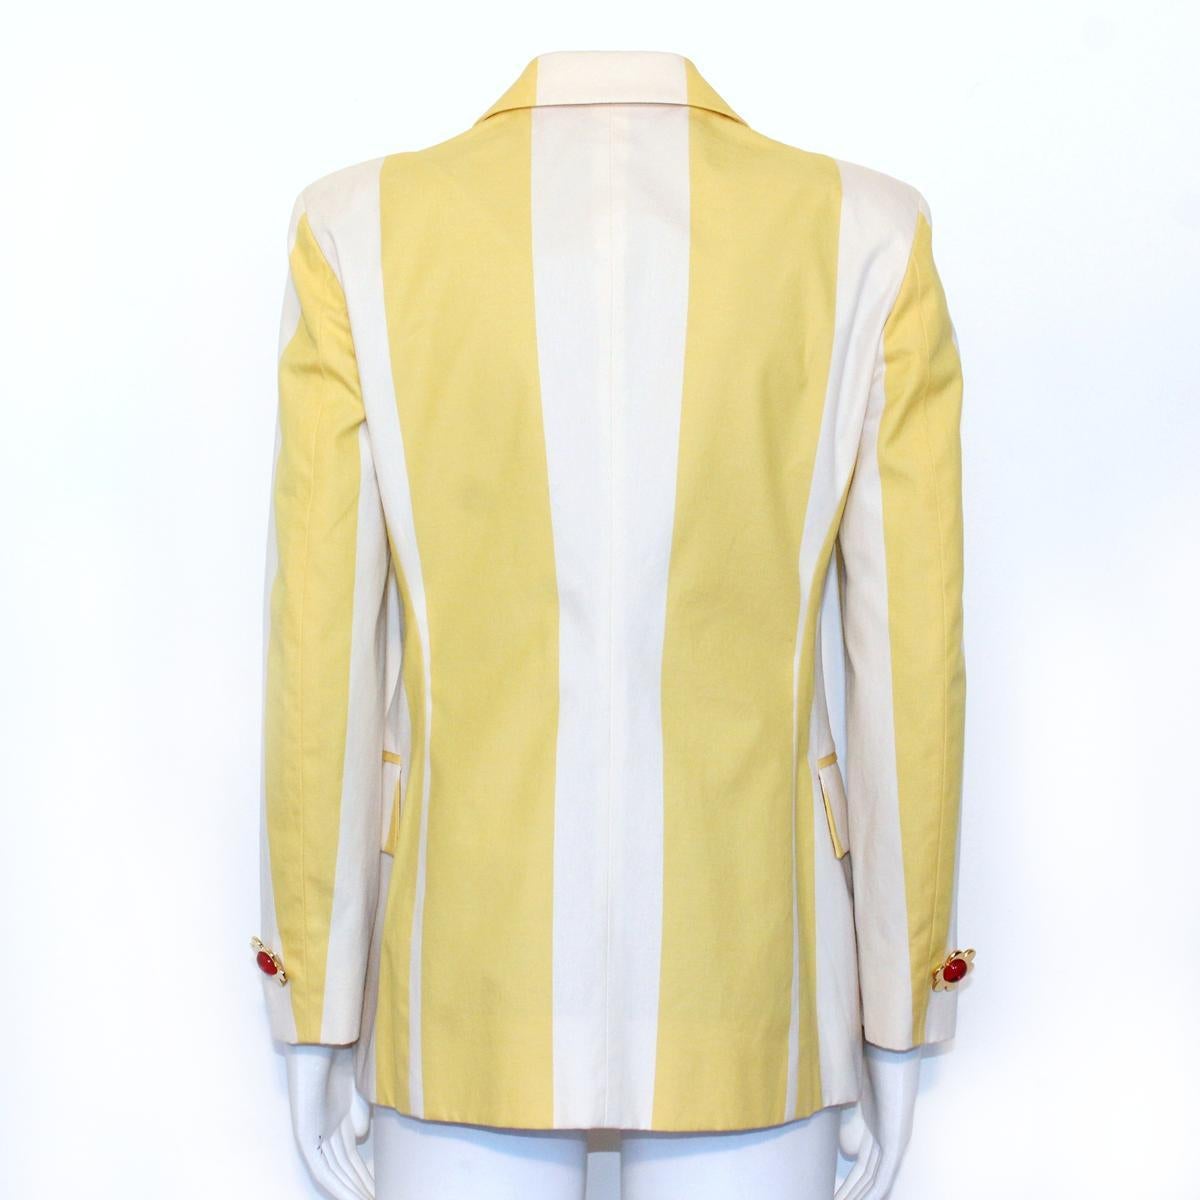 Rare and exclusive piece
Iconic collectible piece, vintage
Moschino Cheap and Chic 
Cotton 
Striped pattern
White and yellow
Jewel buttons
Two pockets
Length from shoulder cm 62 (24.4 inches)
Worldwide express shipping included in the price !